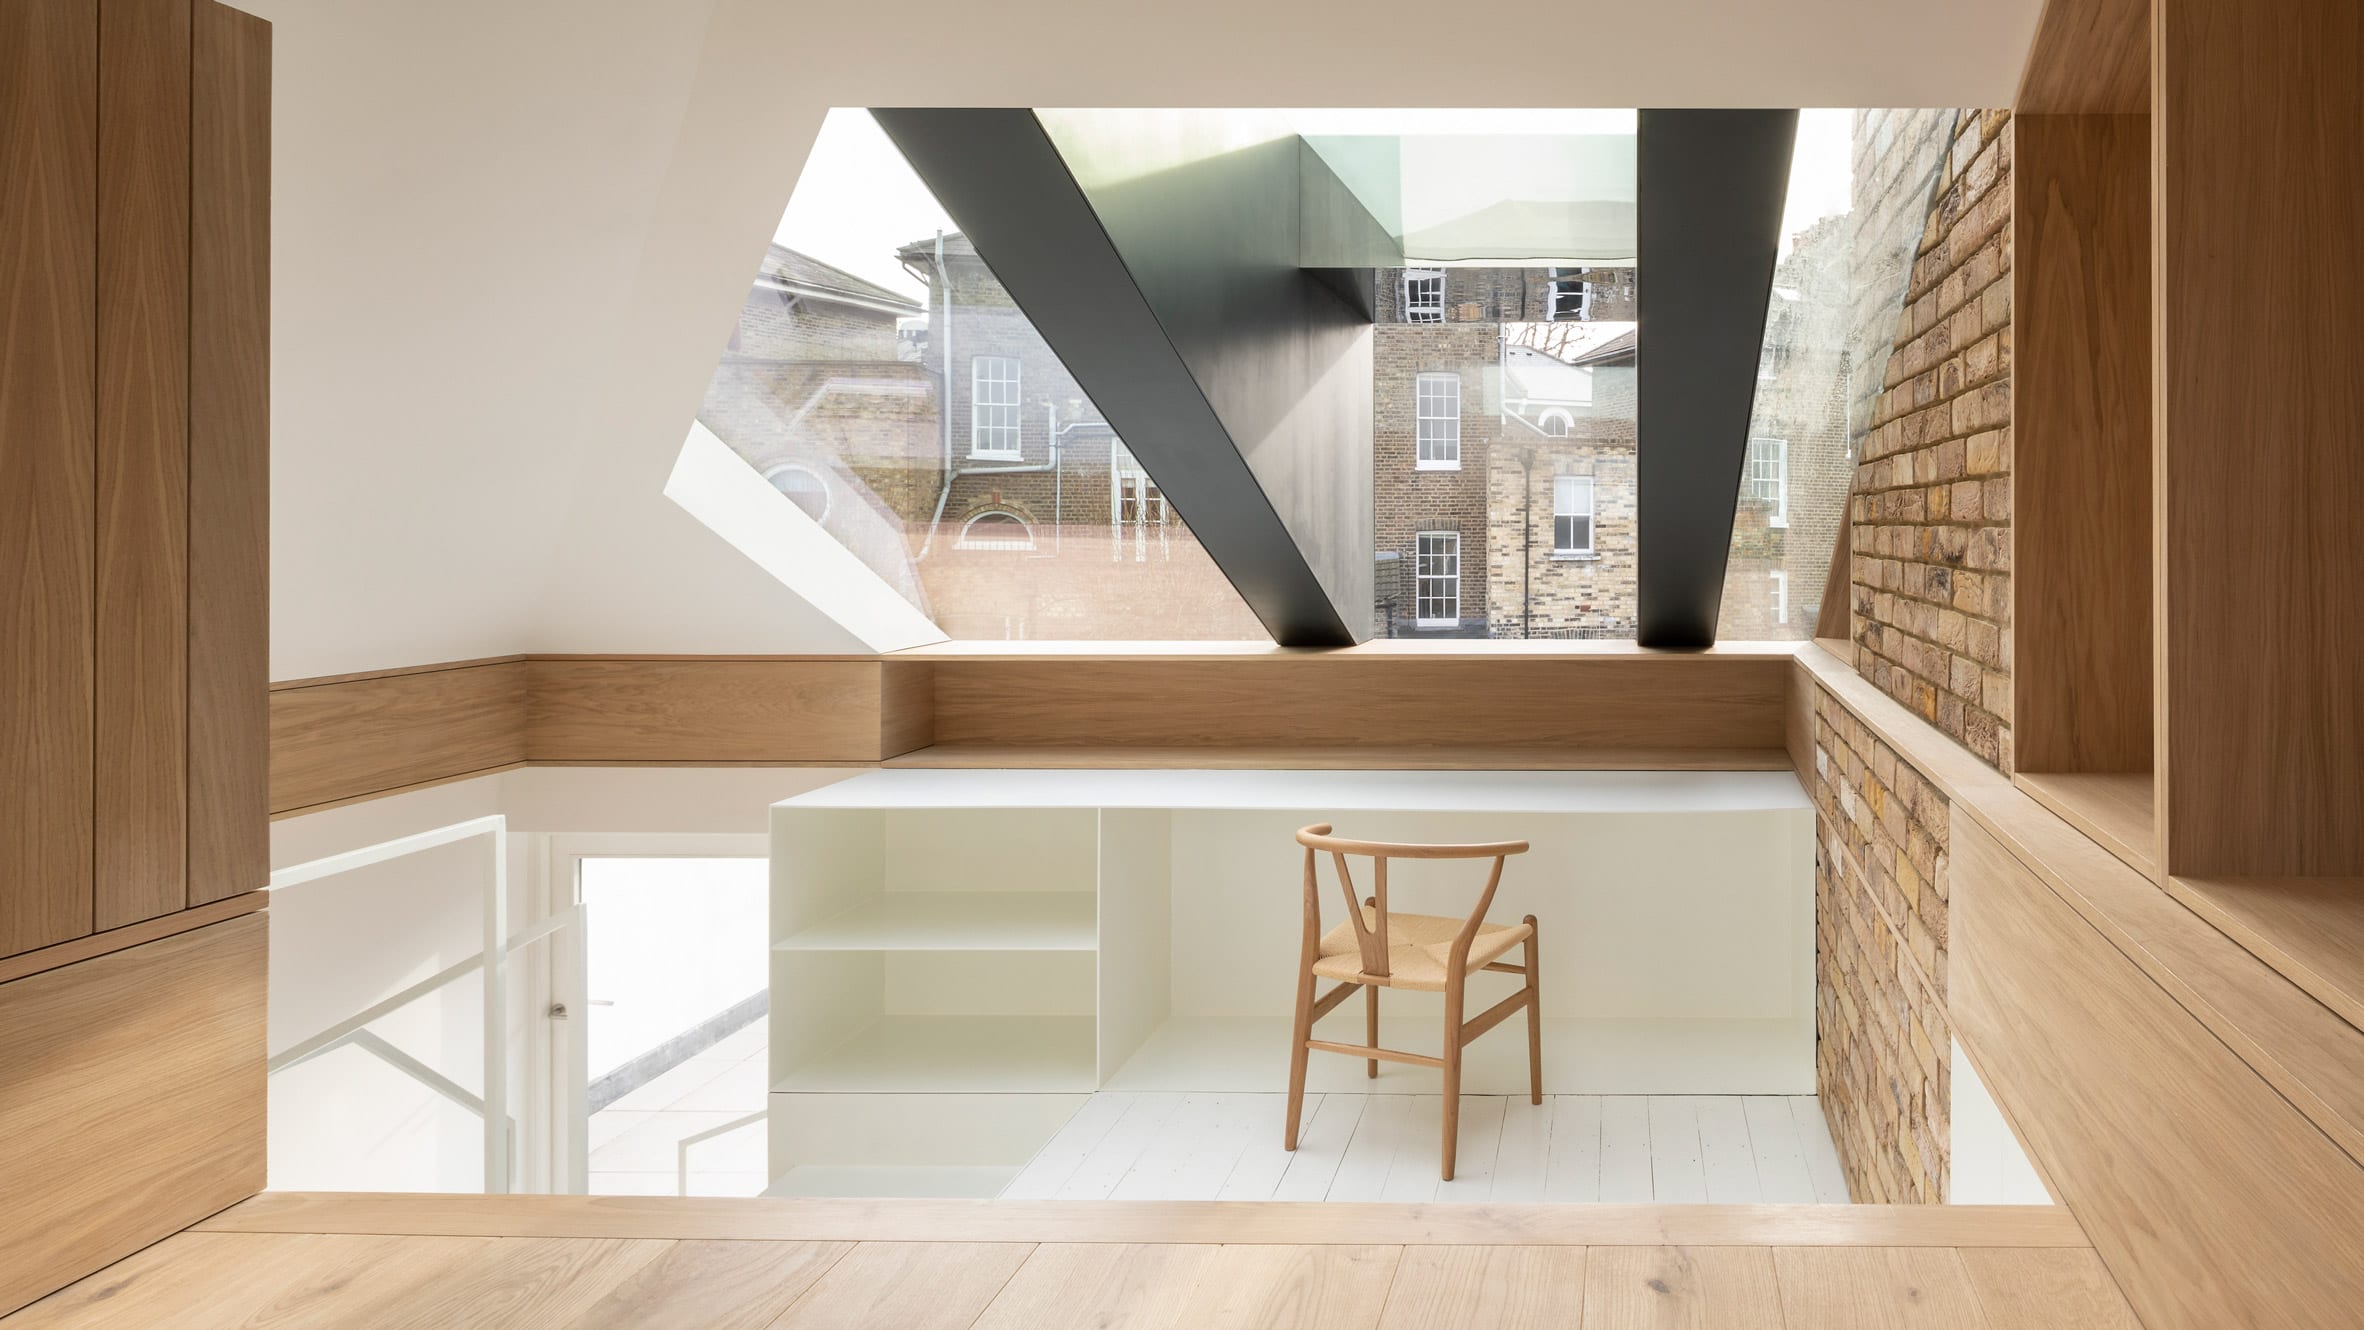 Loft conversions by architects that maximise usable space